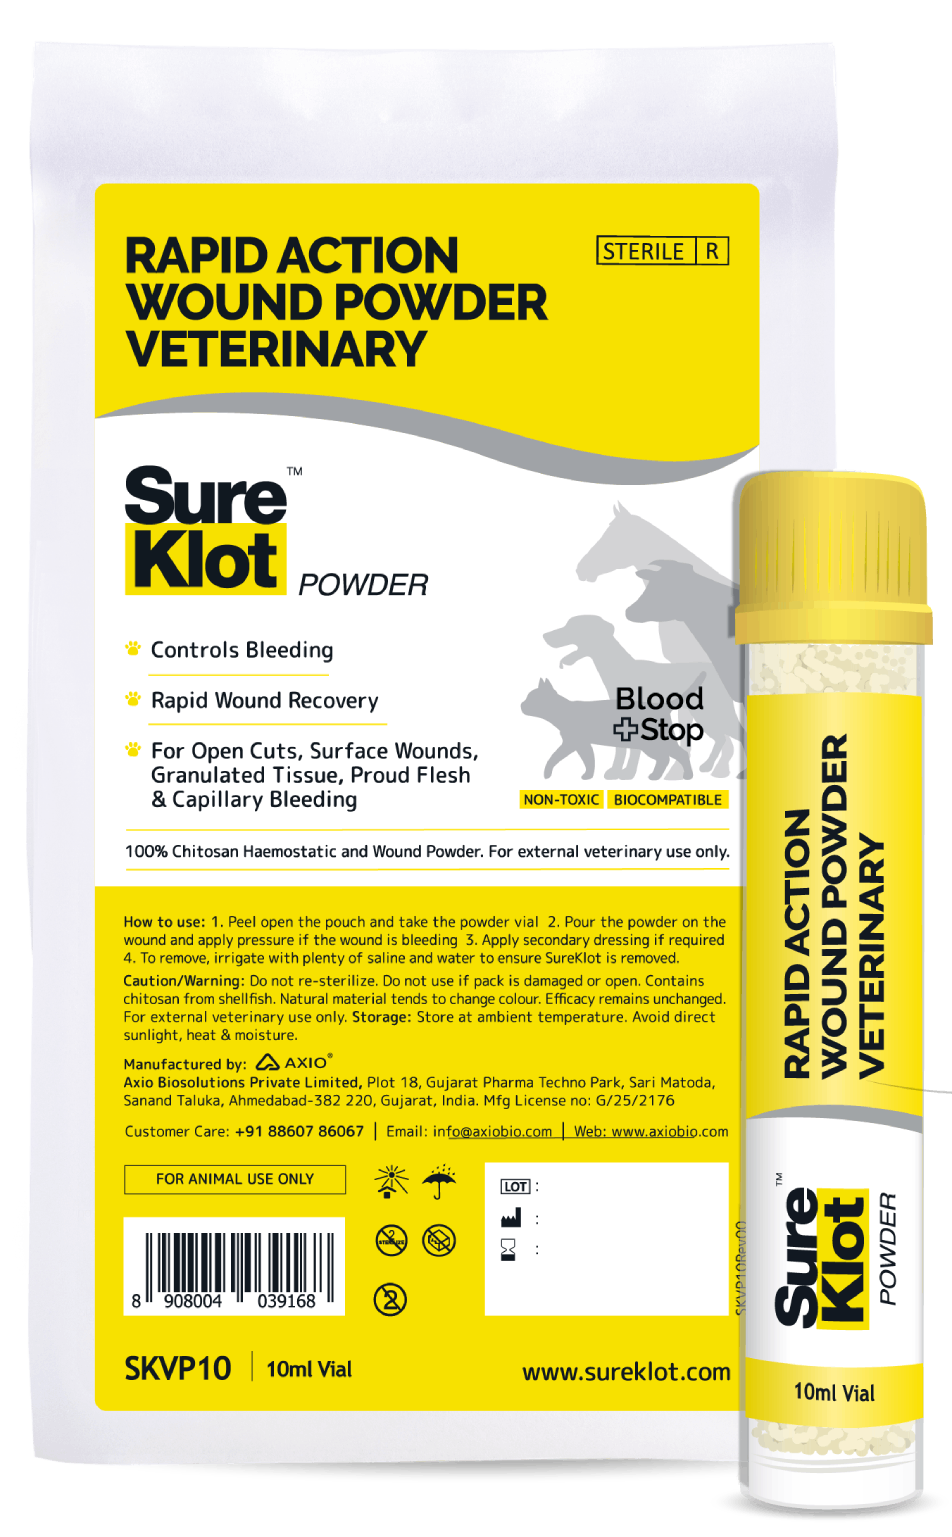 veterinary powder for dogs, cats, horse